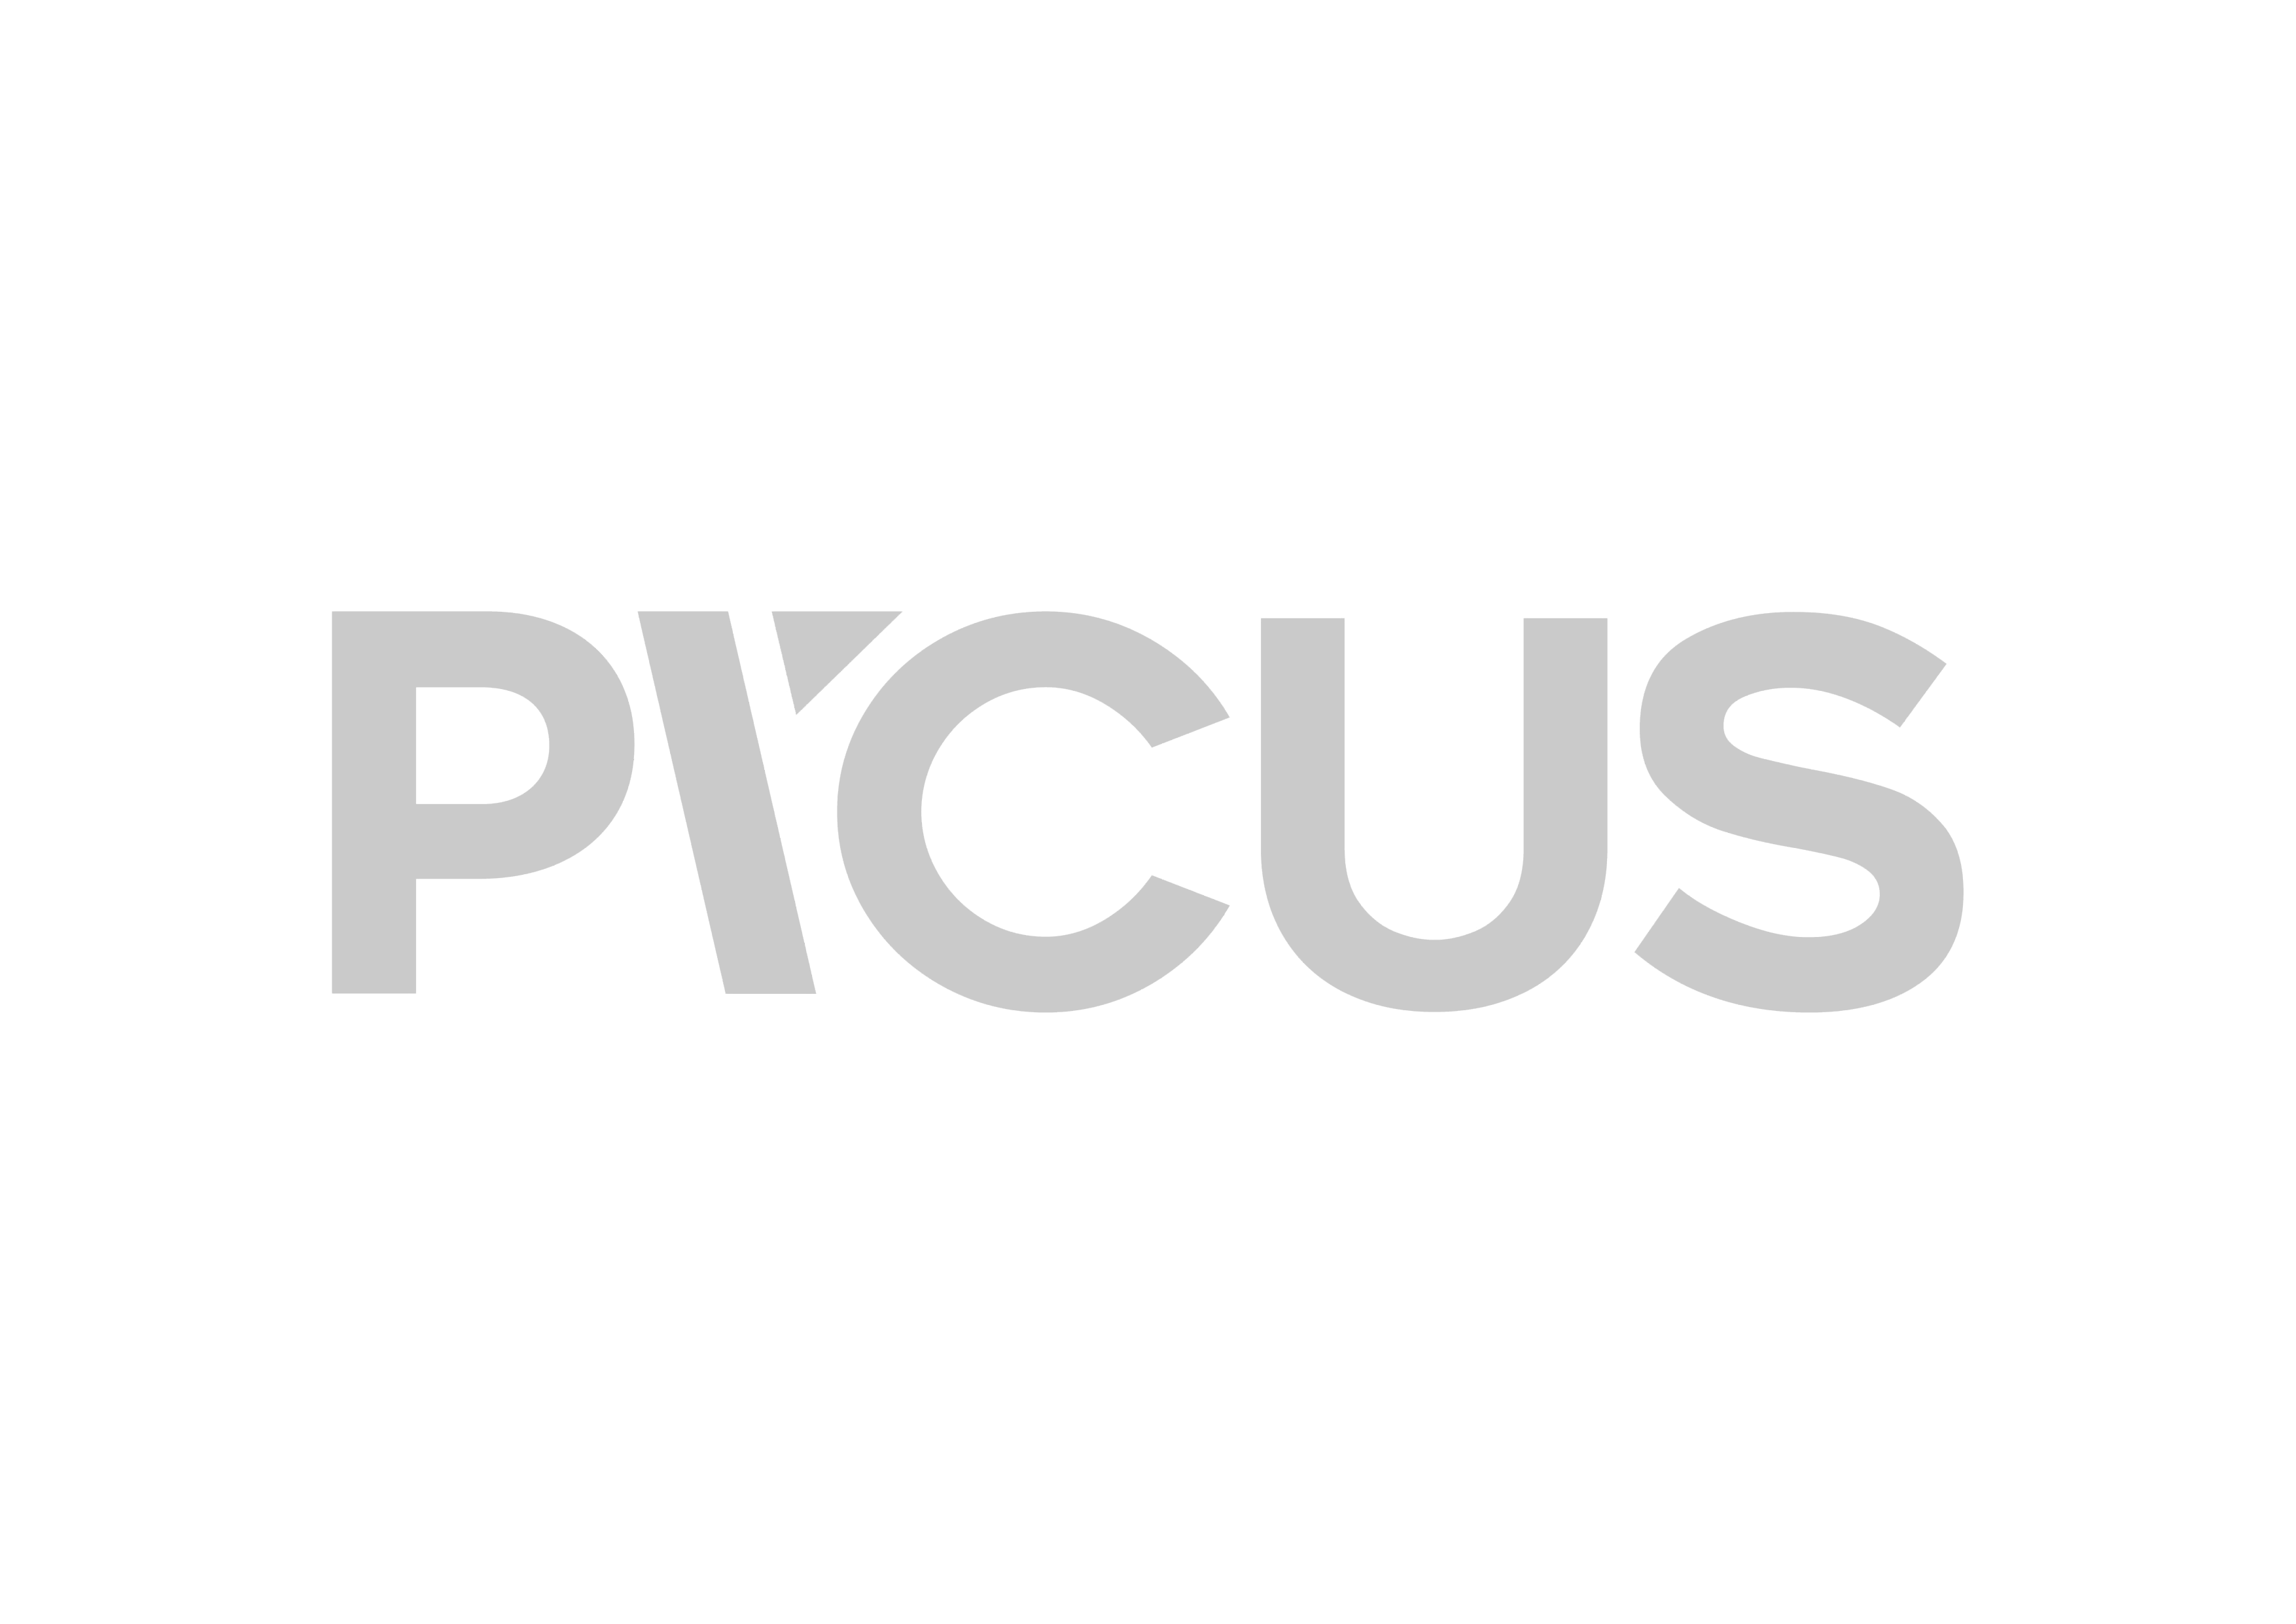 picus-logo.cleaned (1)